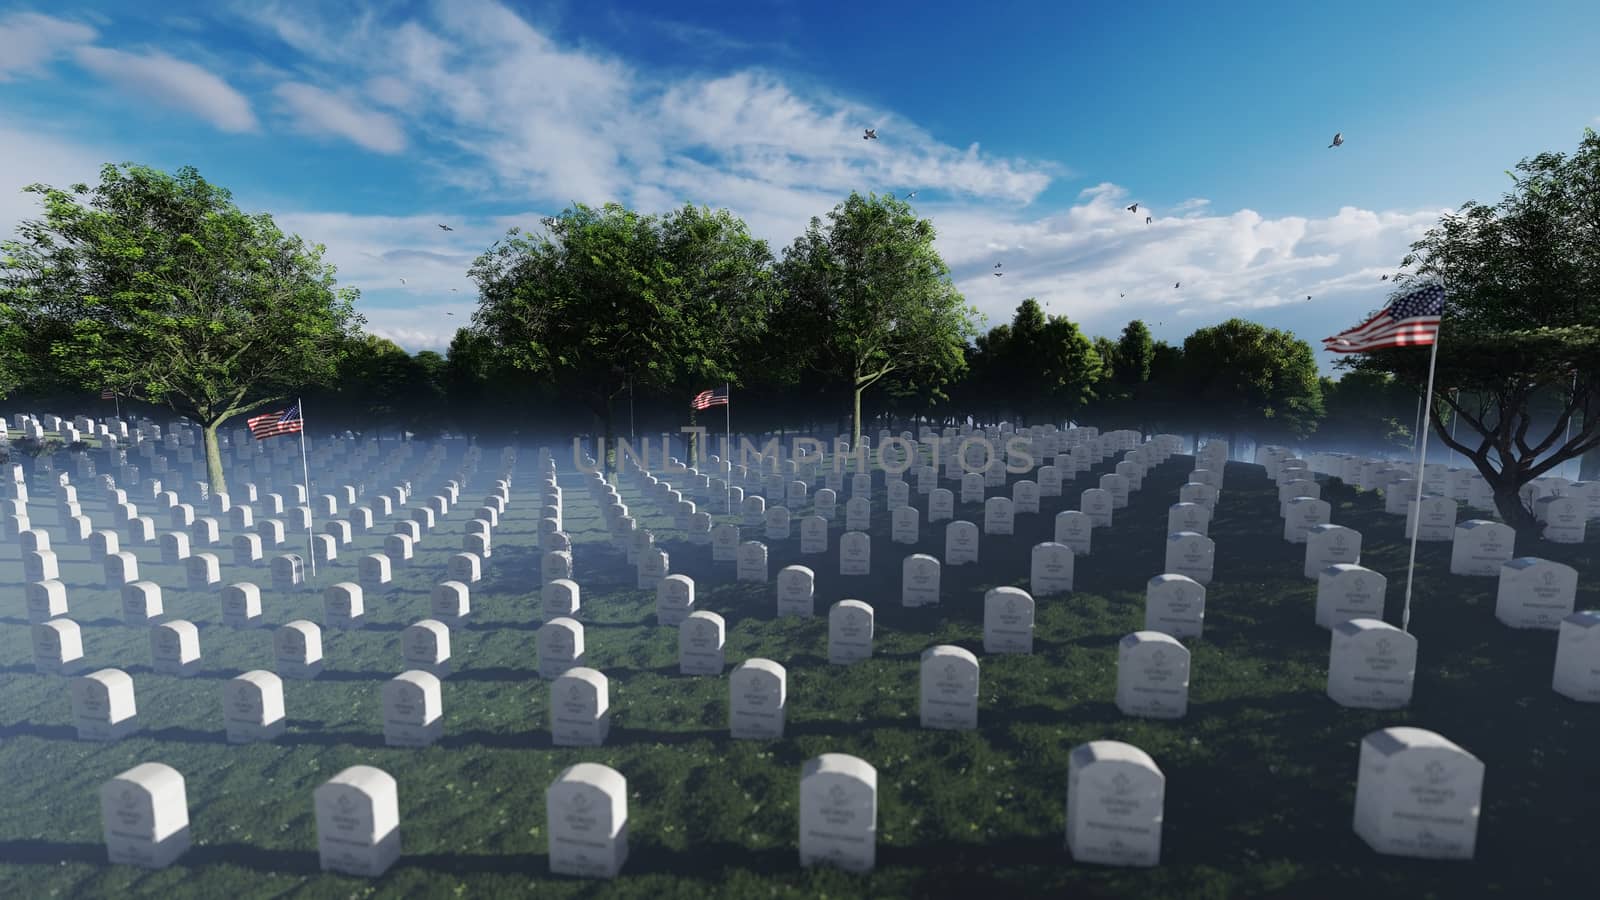 Graves, Headstones and US flags at the Arlington National Cemete by pixelfootage